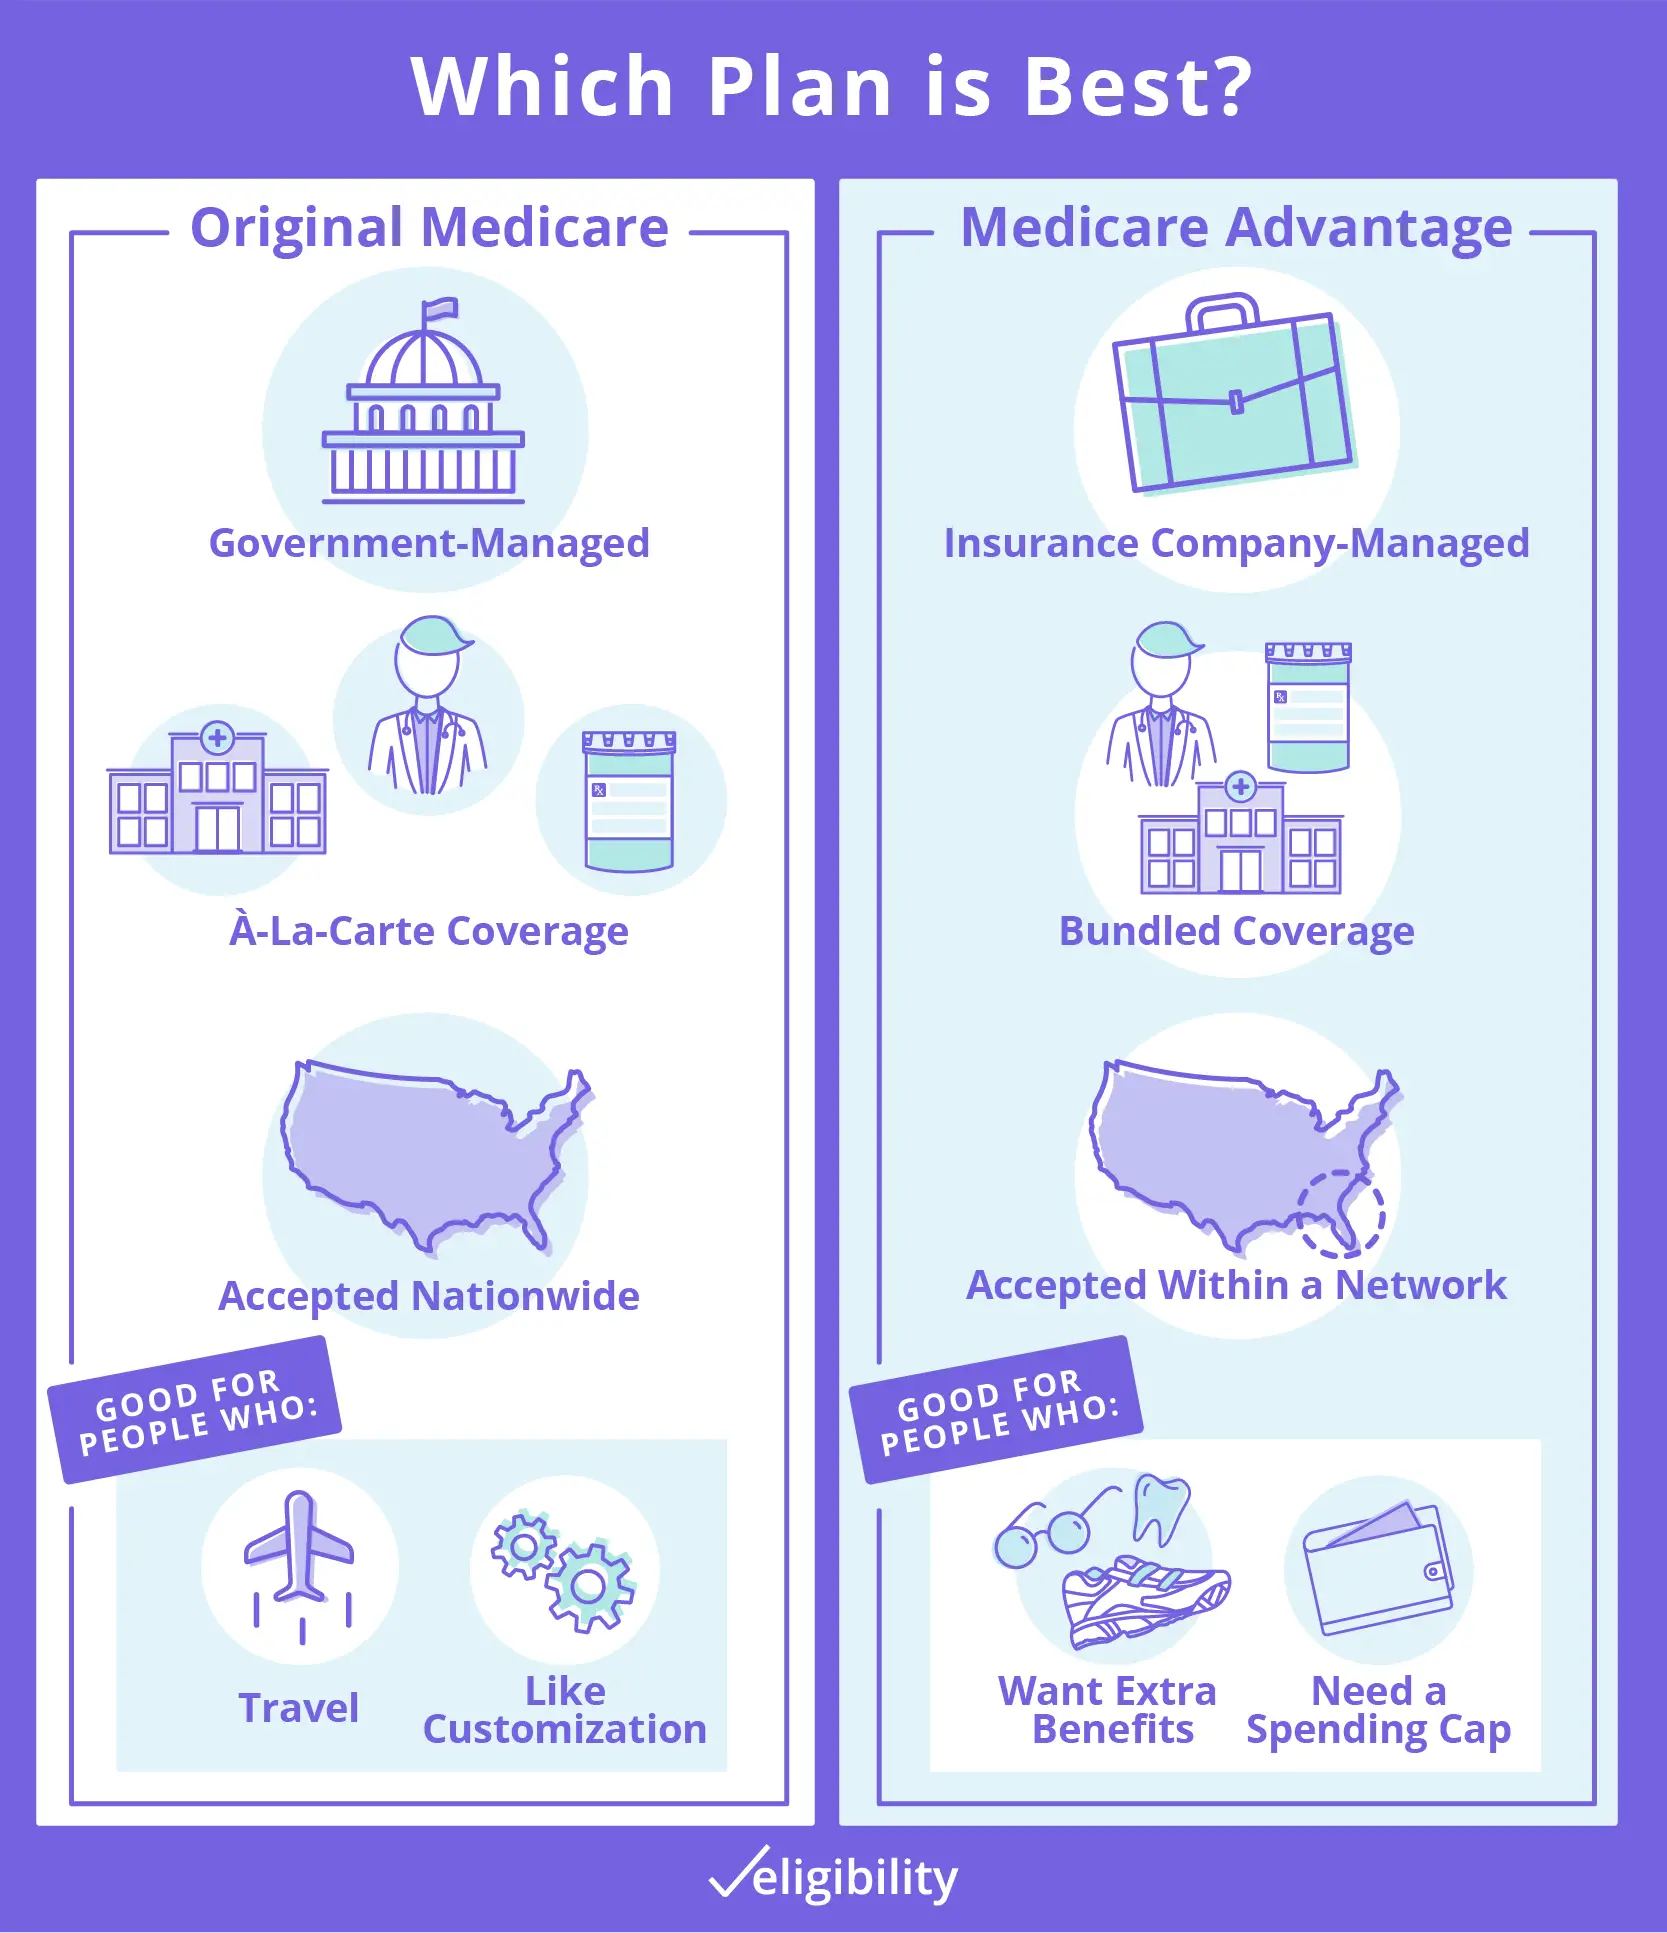 The Best Medicare Plan for You